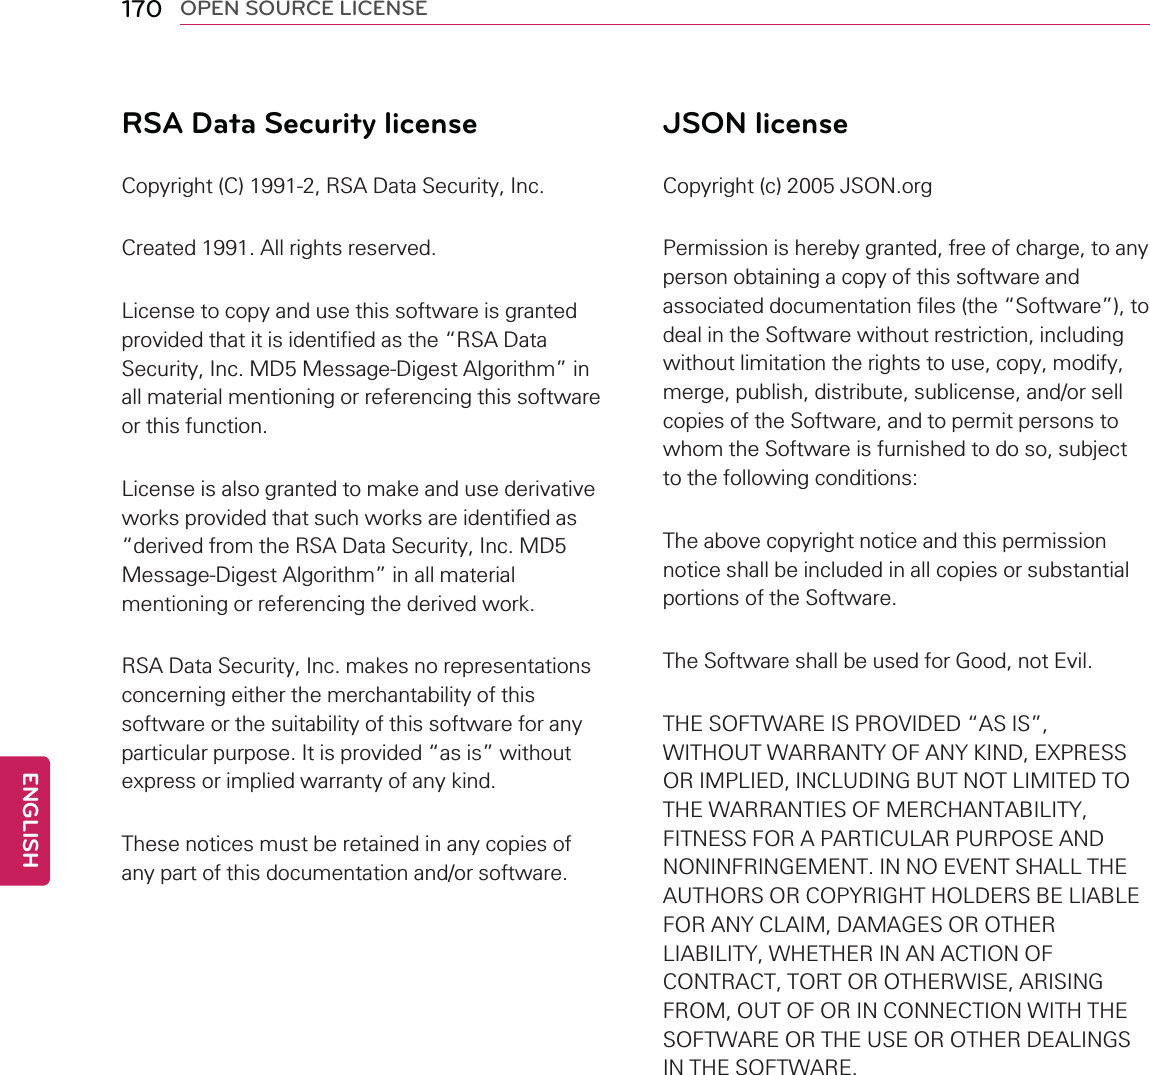 170 OPEN SOURCE LICENSERSA Data Security licenseCopyright (C) 1991-2, RSA Data Security, Inc.Created 1991. All rights reserved.License to copy and use this software is grantedprovided that it is identified as the “RSA DataSecurity, Inc. MD5 Message-Digest Algorithm”inall material mentioning or referencing this softwareor this function.License is also granted to make and use derivativeworks provided that such works are identified as“derived from the RSA Data Security, Inc. MD5Message-Digest Algorithm”in all materialmentioning or referencing the derived work.RSA Data Security, Inc. makes no representationsconcerning either the merchantability of thissoftware or the suitability of this software for anyparticular purpose. It is provided “as is”withoutexpress or implied warranty of any kind.These notices must be retained in any copies ofany part of this documentation and/or software.JSON licenseCopyright (c) 2005 JSON.orgPermission is hereby granted, free of charge, to anyperson obtaining a copy of this software andassociated documentation files (the “Software”), todeal in the Software without restriction, includingwithout limitation the rights to use, copy, modify,merge, publish, distribute, sublicense, and/or sellcopies of the Software, and to permit persons towhom the Software is furnished to do so, subjectto the following conditions:The above copyright notice and this permissionnotice shall be included in all copies or substantialportions of the Software.The Software shall be used for Good, not Evil.THE SOFTWARE IS PROVIDED “AS IS”,WITHOUT WARRANTY OF ANY KIND, EXPRESSOR IMPLIED, INCLUDING BUT NOT LIMITED TOTHE WARRANTIES OF MERCHANTABILITY,FITNESS FOR A PARTICULAR PURPOSE ANDNONINFRINGEMENT. IN NO EVENT SHALL THEAUTHORS OR COPYRIGHT HOLDERS BE LIABLEFOR ANY CLAIM, DAMAGES OR OTHERLIABILITY, WHETHER IN AN ACTION OFCONTRACT, TORT OR OTHERWISE, ARISINGFROM, OUT OF OR IN CONNECTION WITH THESOFTWARE OR THE USE OR OTHER DEALINGSIN THE SOFTWARE.ENGLISH